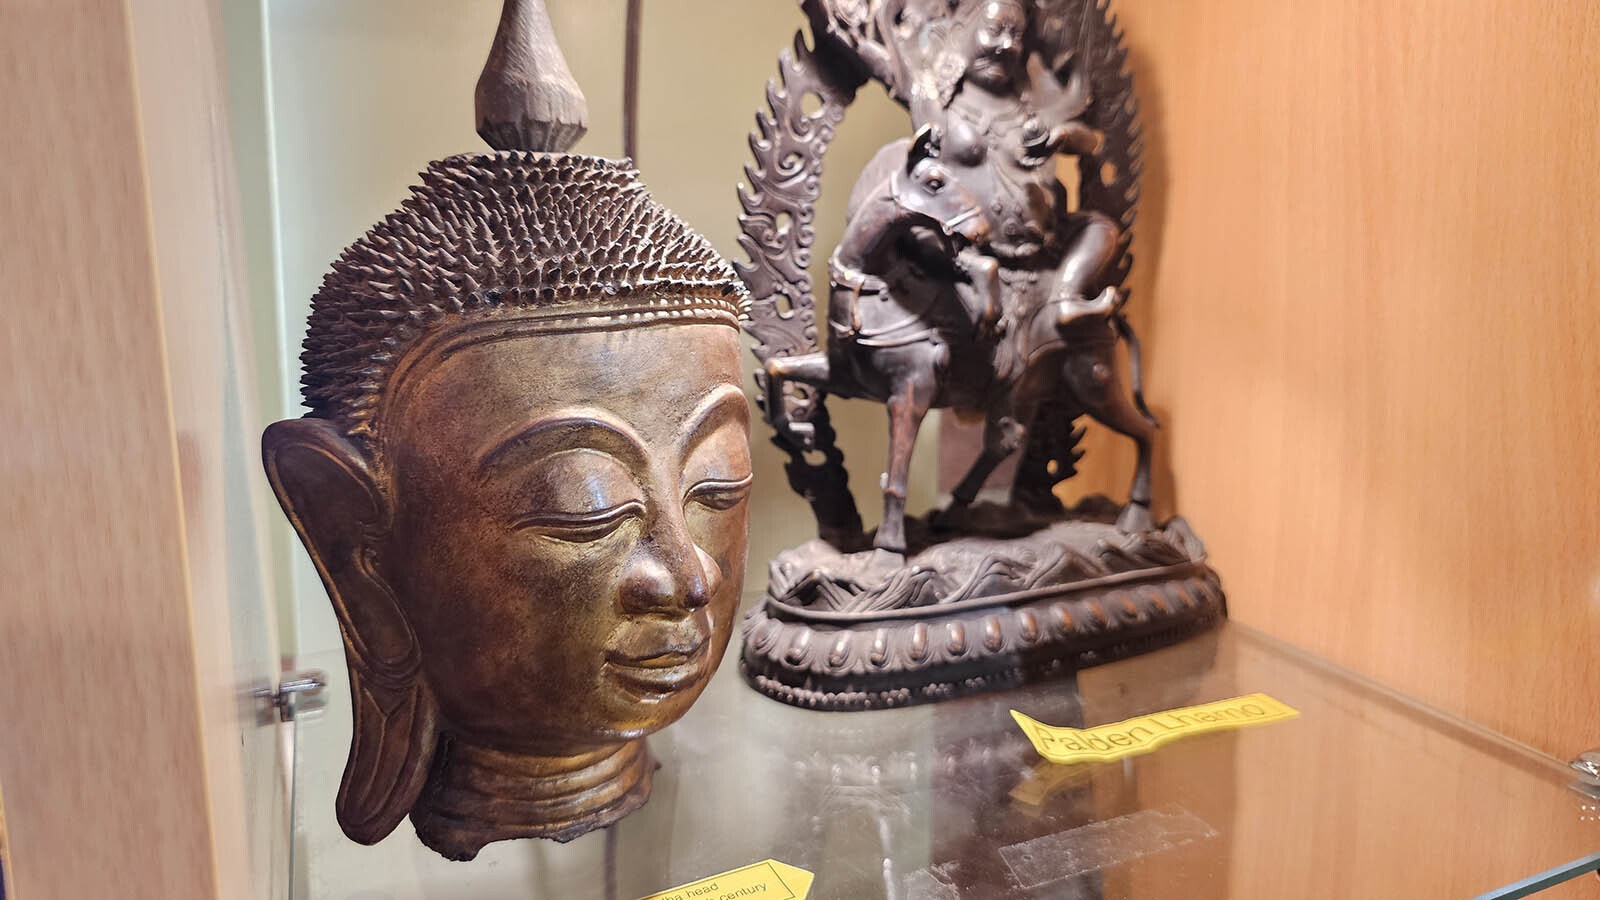 A wooden Buddha head from the late 19th or early 20th century from Burma (Myanmar), left, and a Palden Lhamo, back.